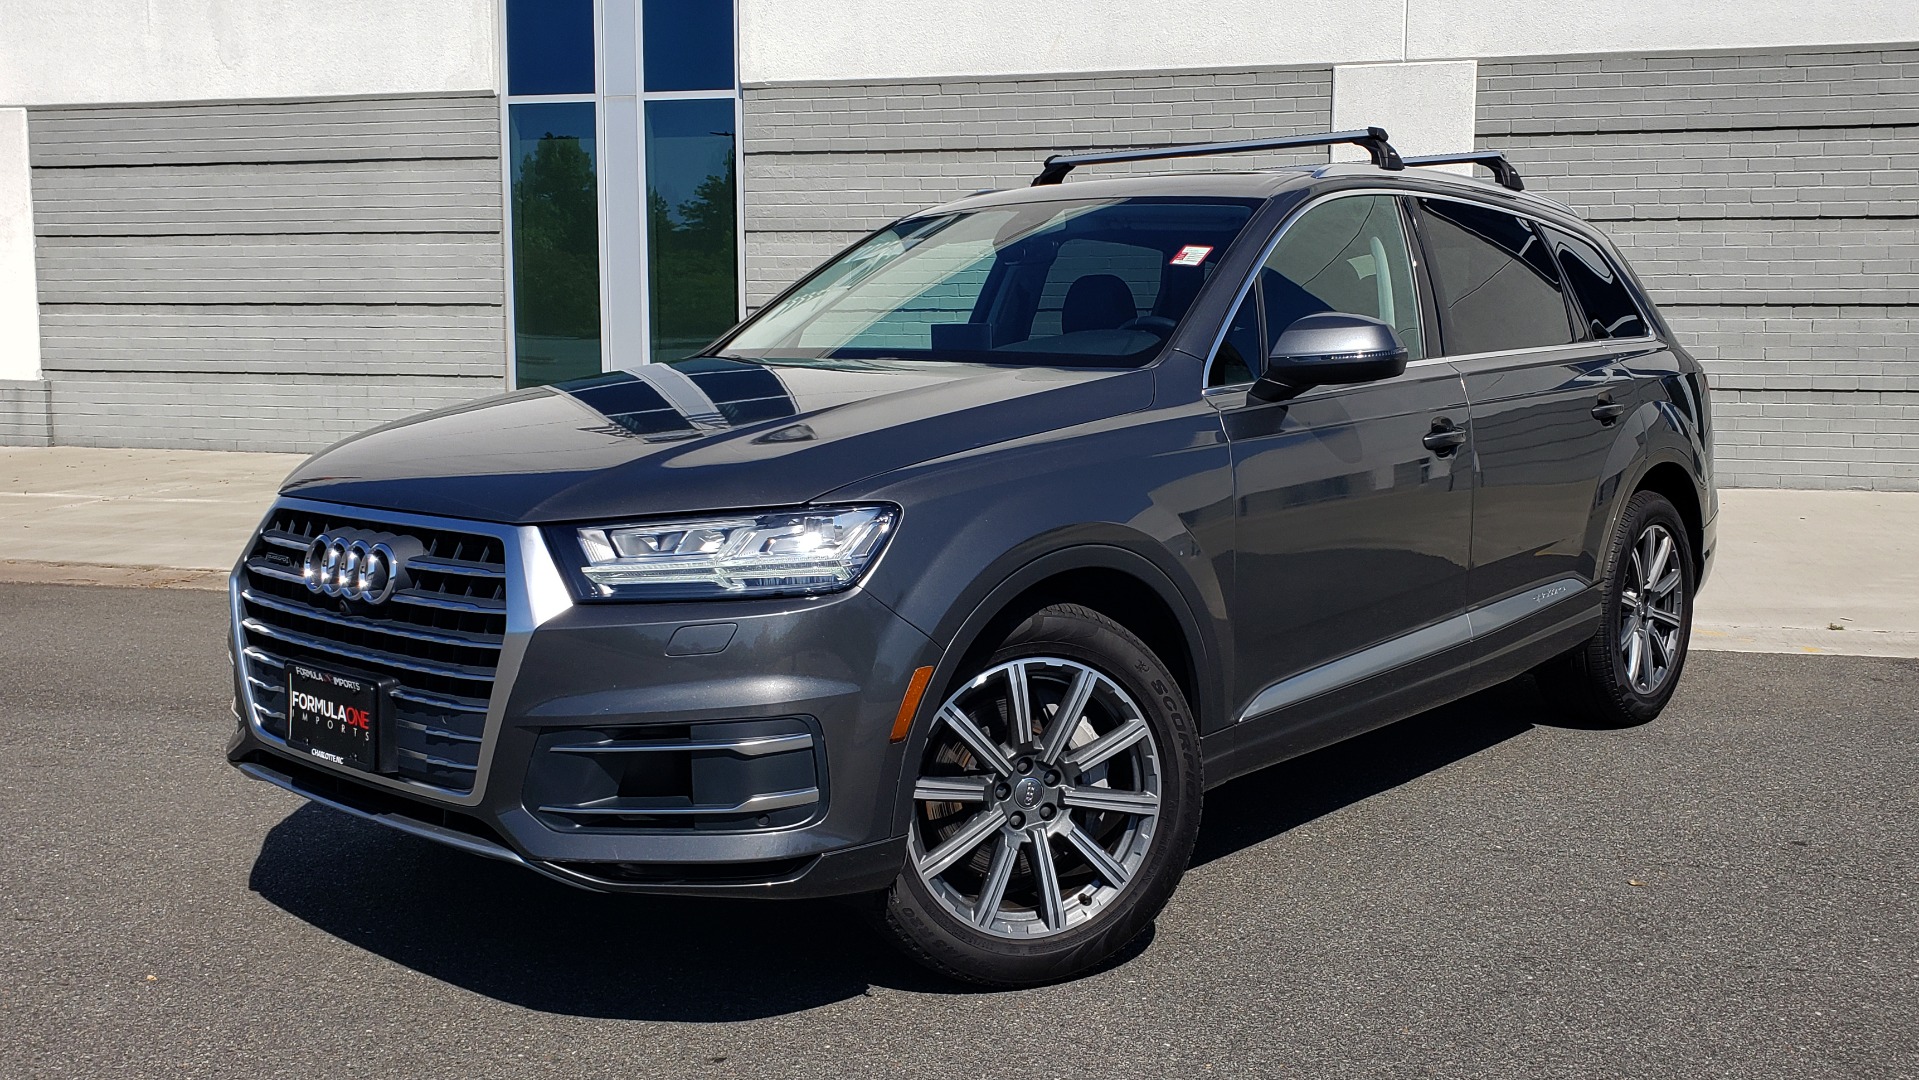 Used 2018 Audi Q7 PREMIUM PLUS TIPTRONIC / NAV / SUNROOF / VISION PKG / CLD WTHR / REARVIEW for sale Sold at Formula Imports in Charlotte NC 28227 1